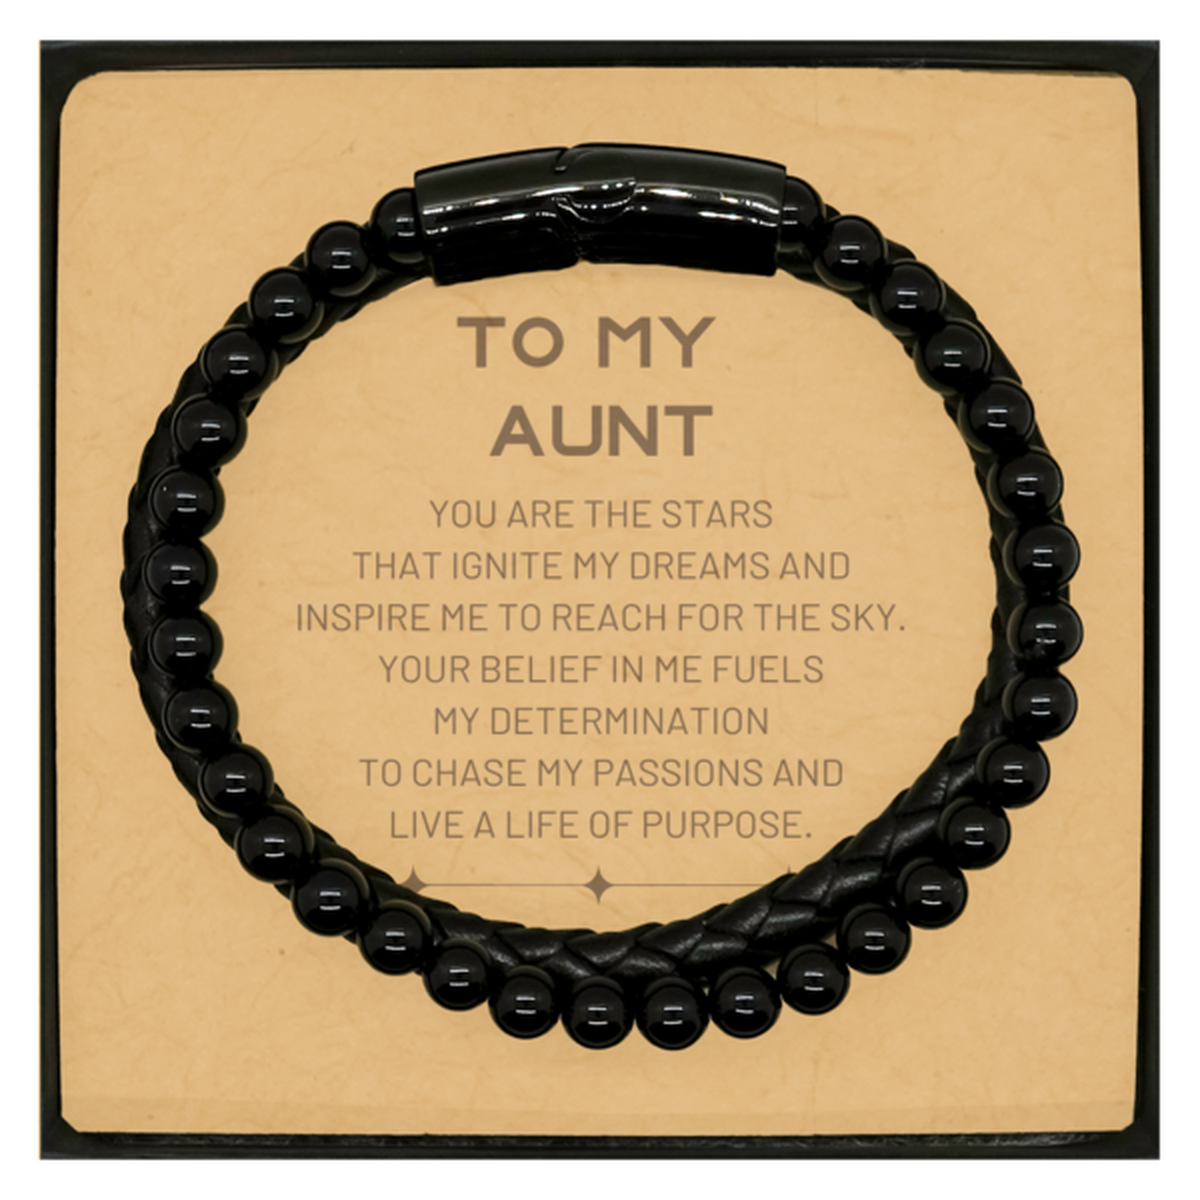 To My Aunt Stone Leather Bracelets, You are the stars that ignite my dreams and inspire me to reach for the sky, Birthday Christmas Unique Gifts For Aunt, Thank You Gifts For Aunt